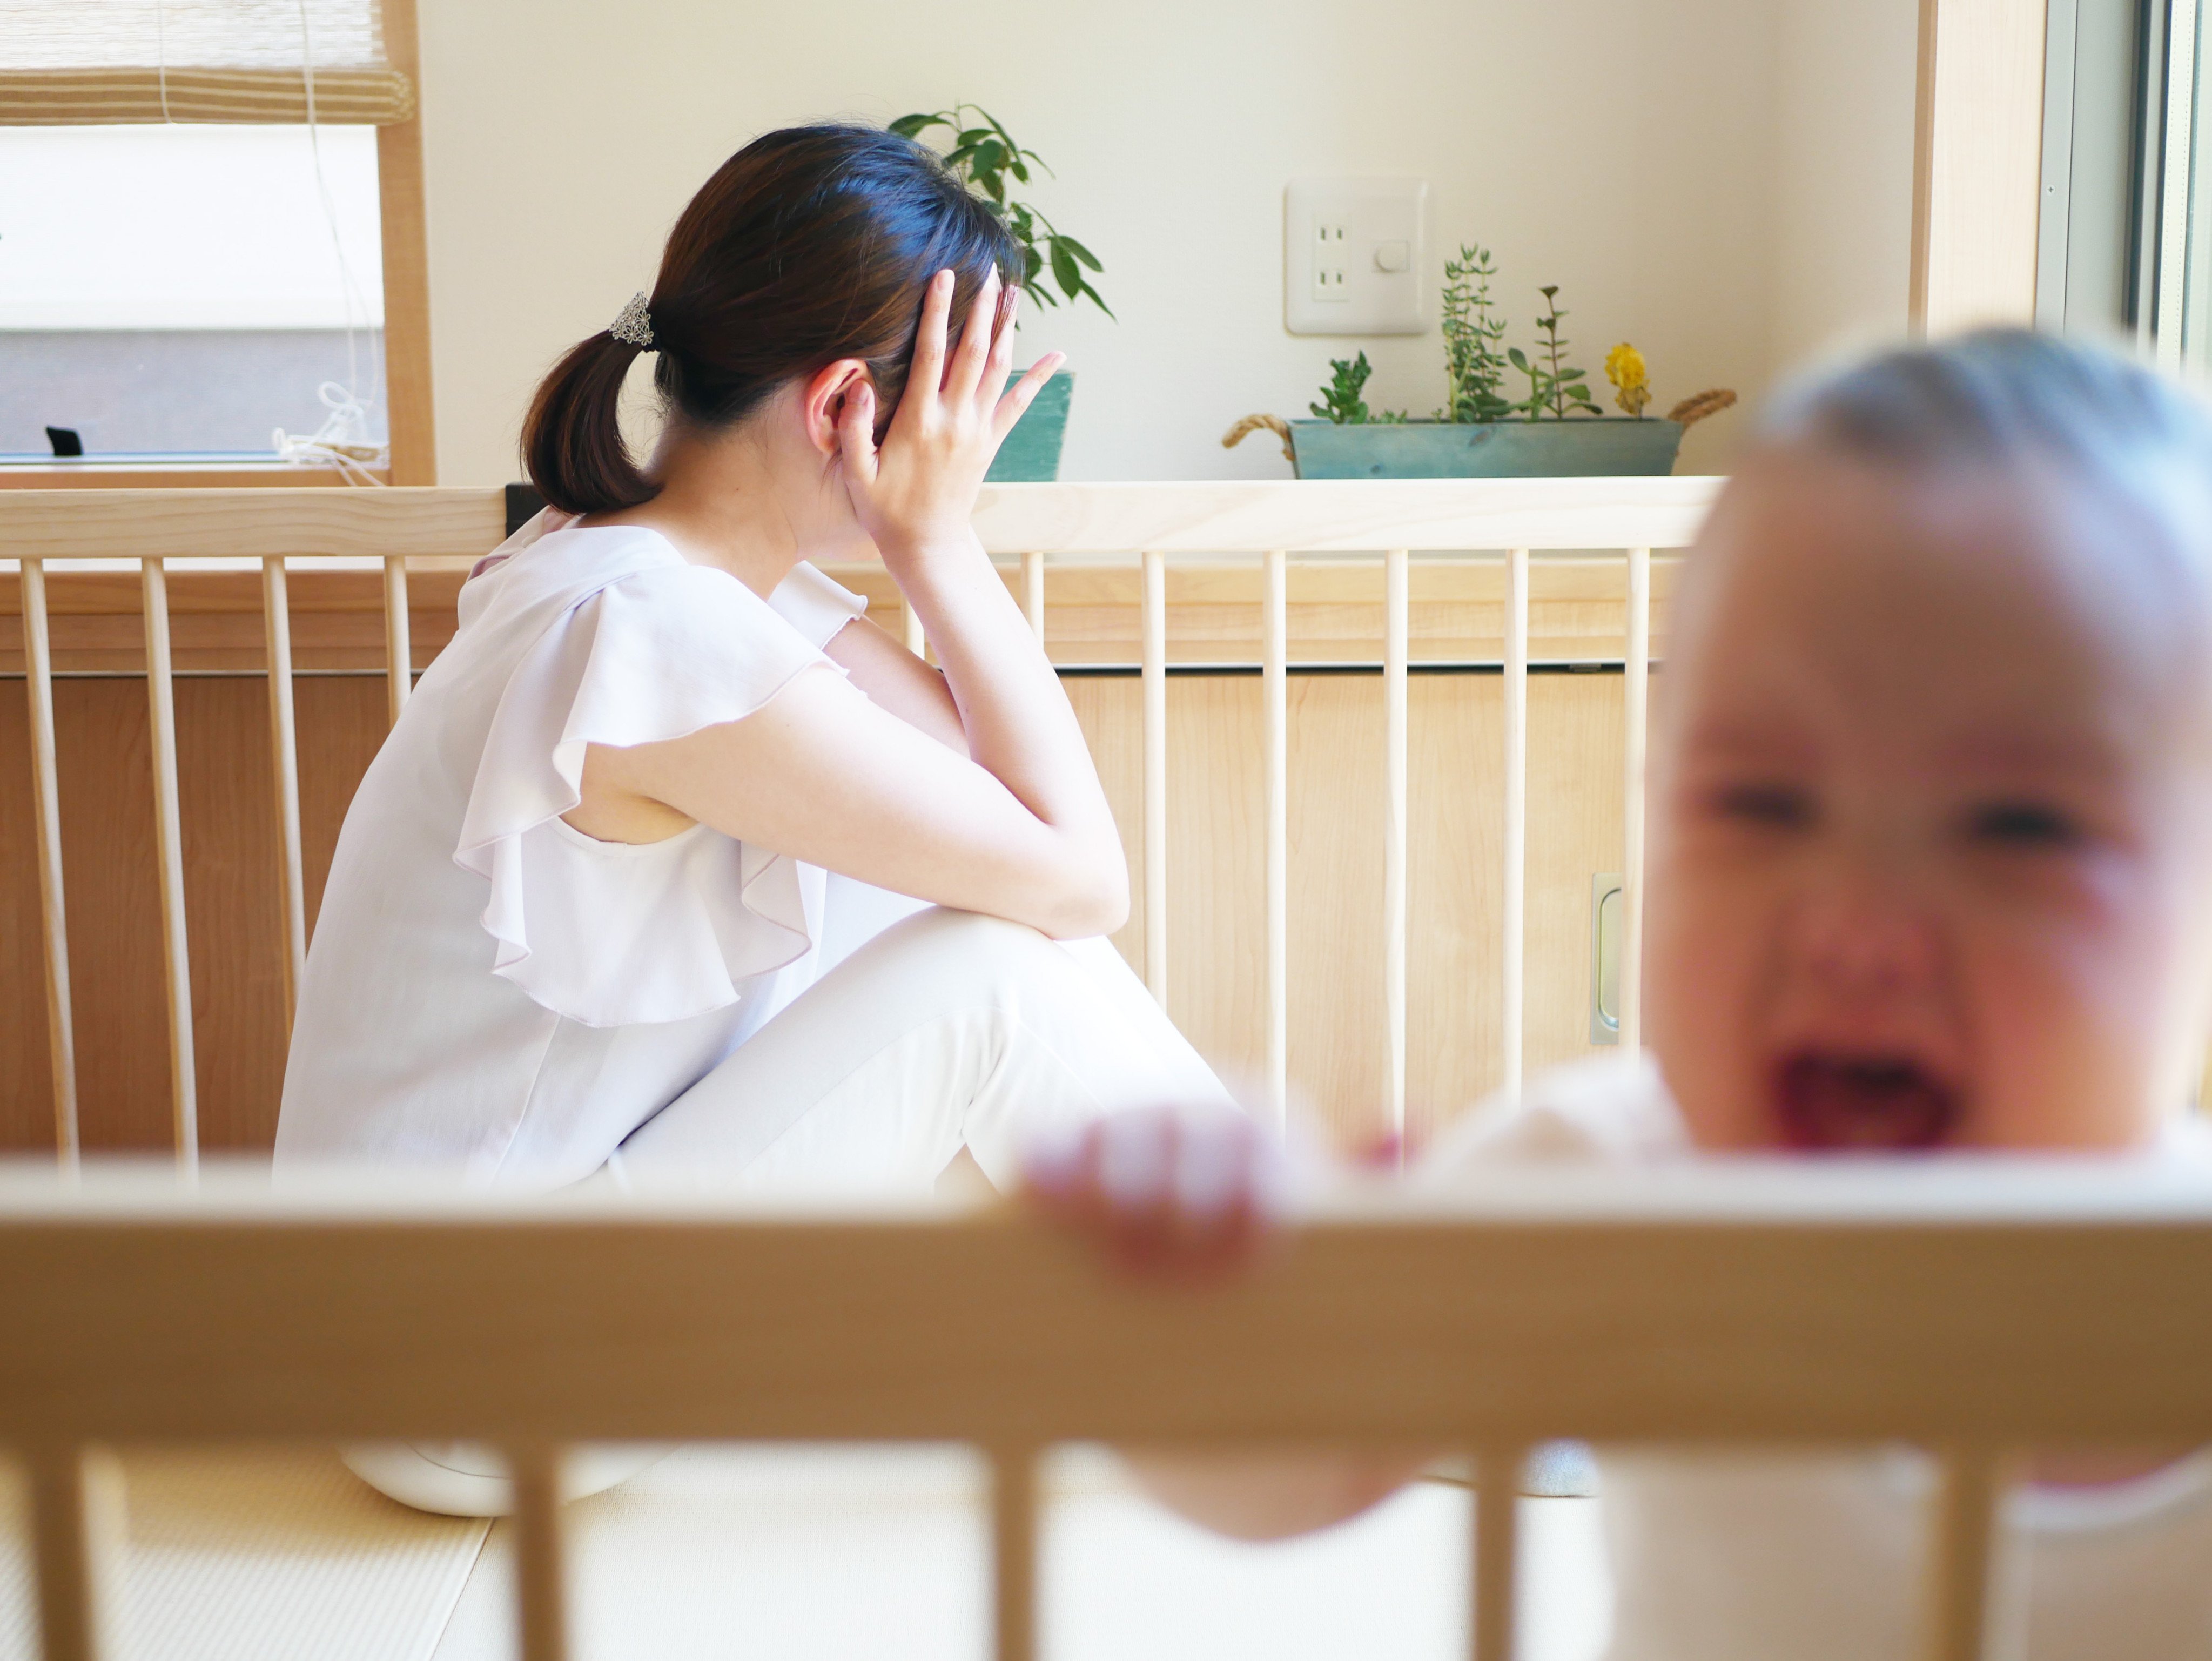 With the persistence of secrecy related to mental health problems and seeking help being seen as a sign of weakness, mothers often end up suffering silently in isolation. Photo: Shutterstock